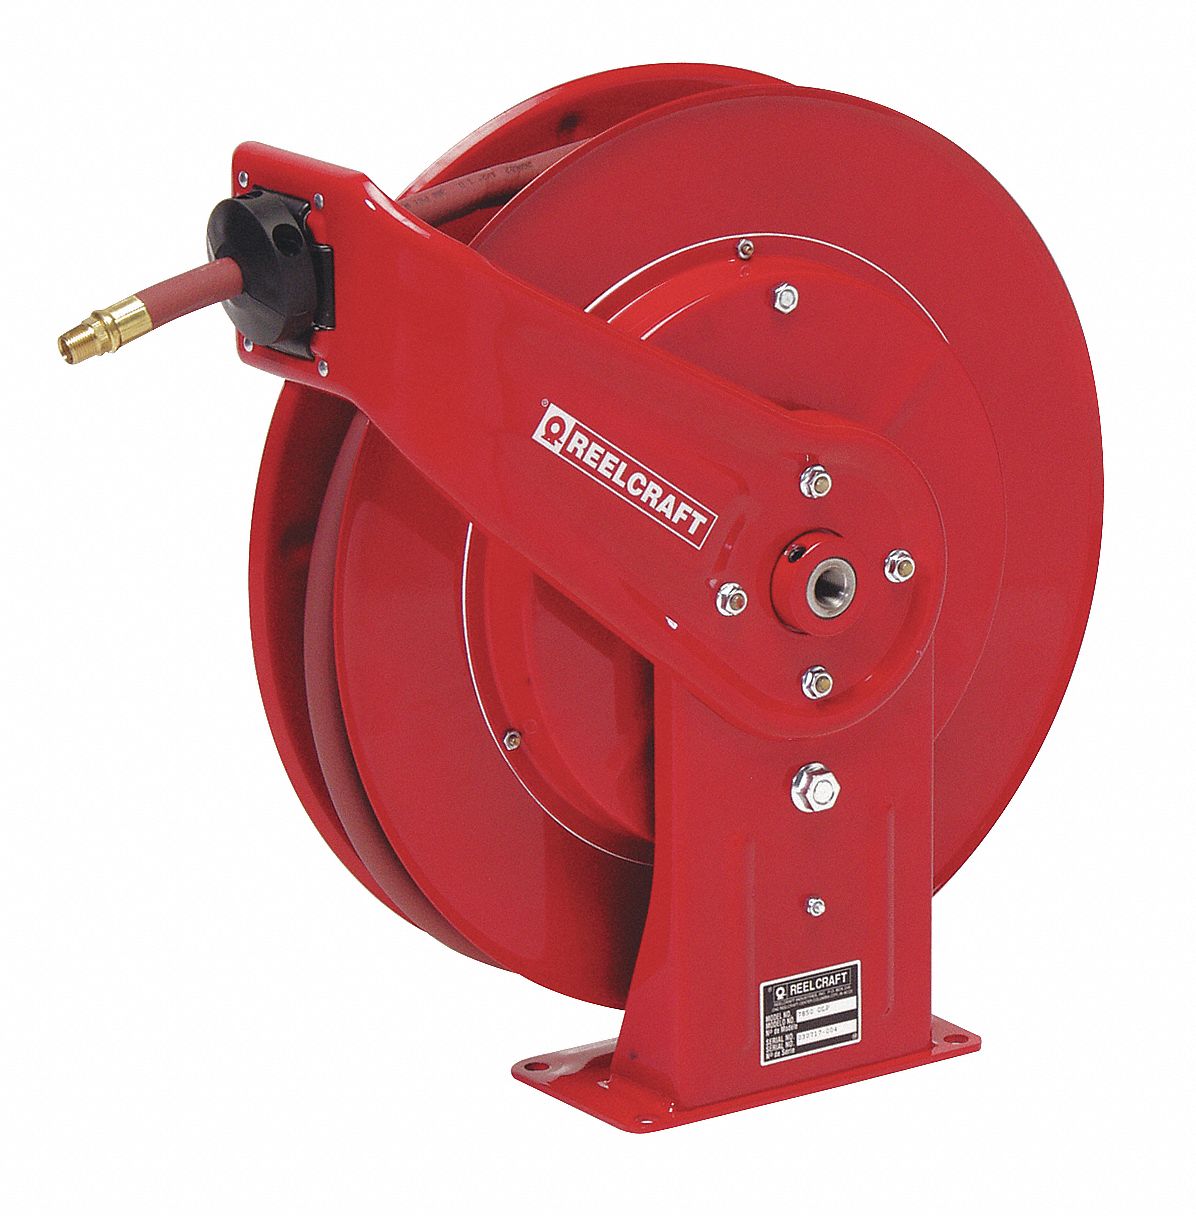 Oil Hose Reel with 20 Mtrs of 1/2 hose